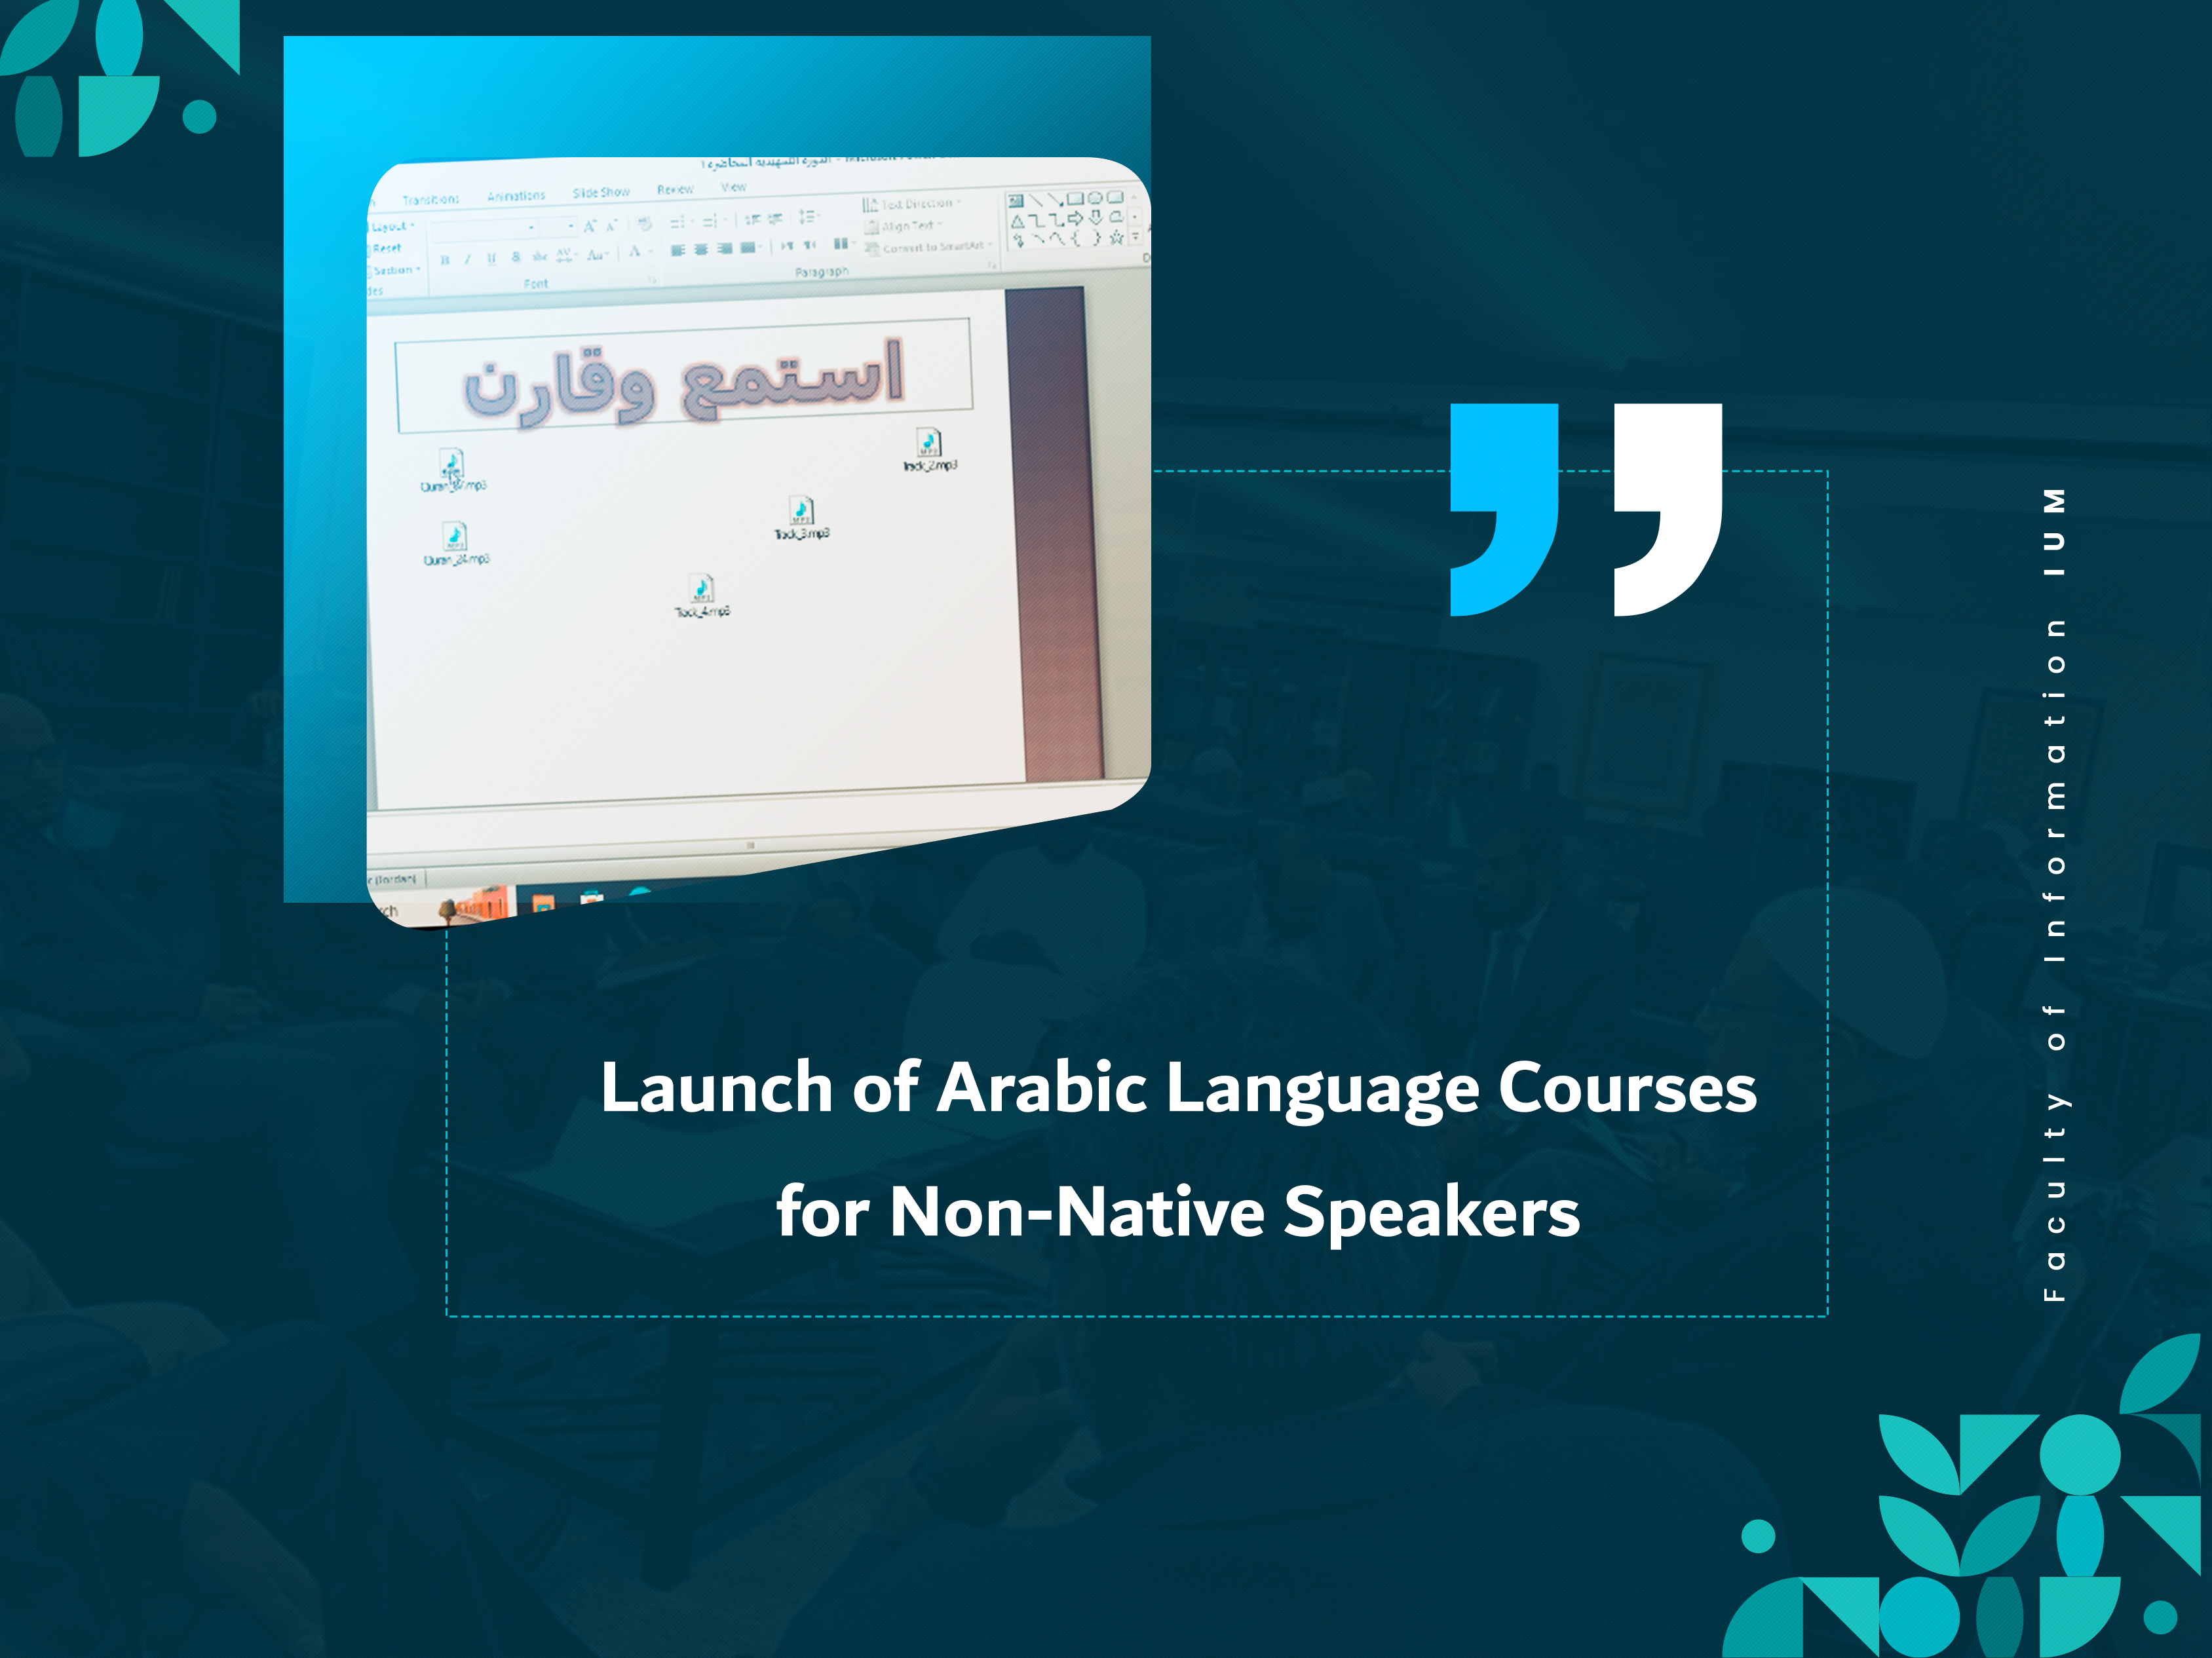 Launch of Arabic Language Courses for Non-Native Speakers